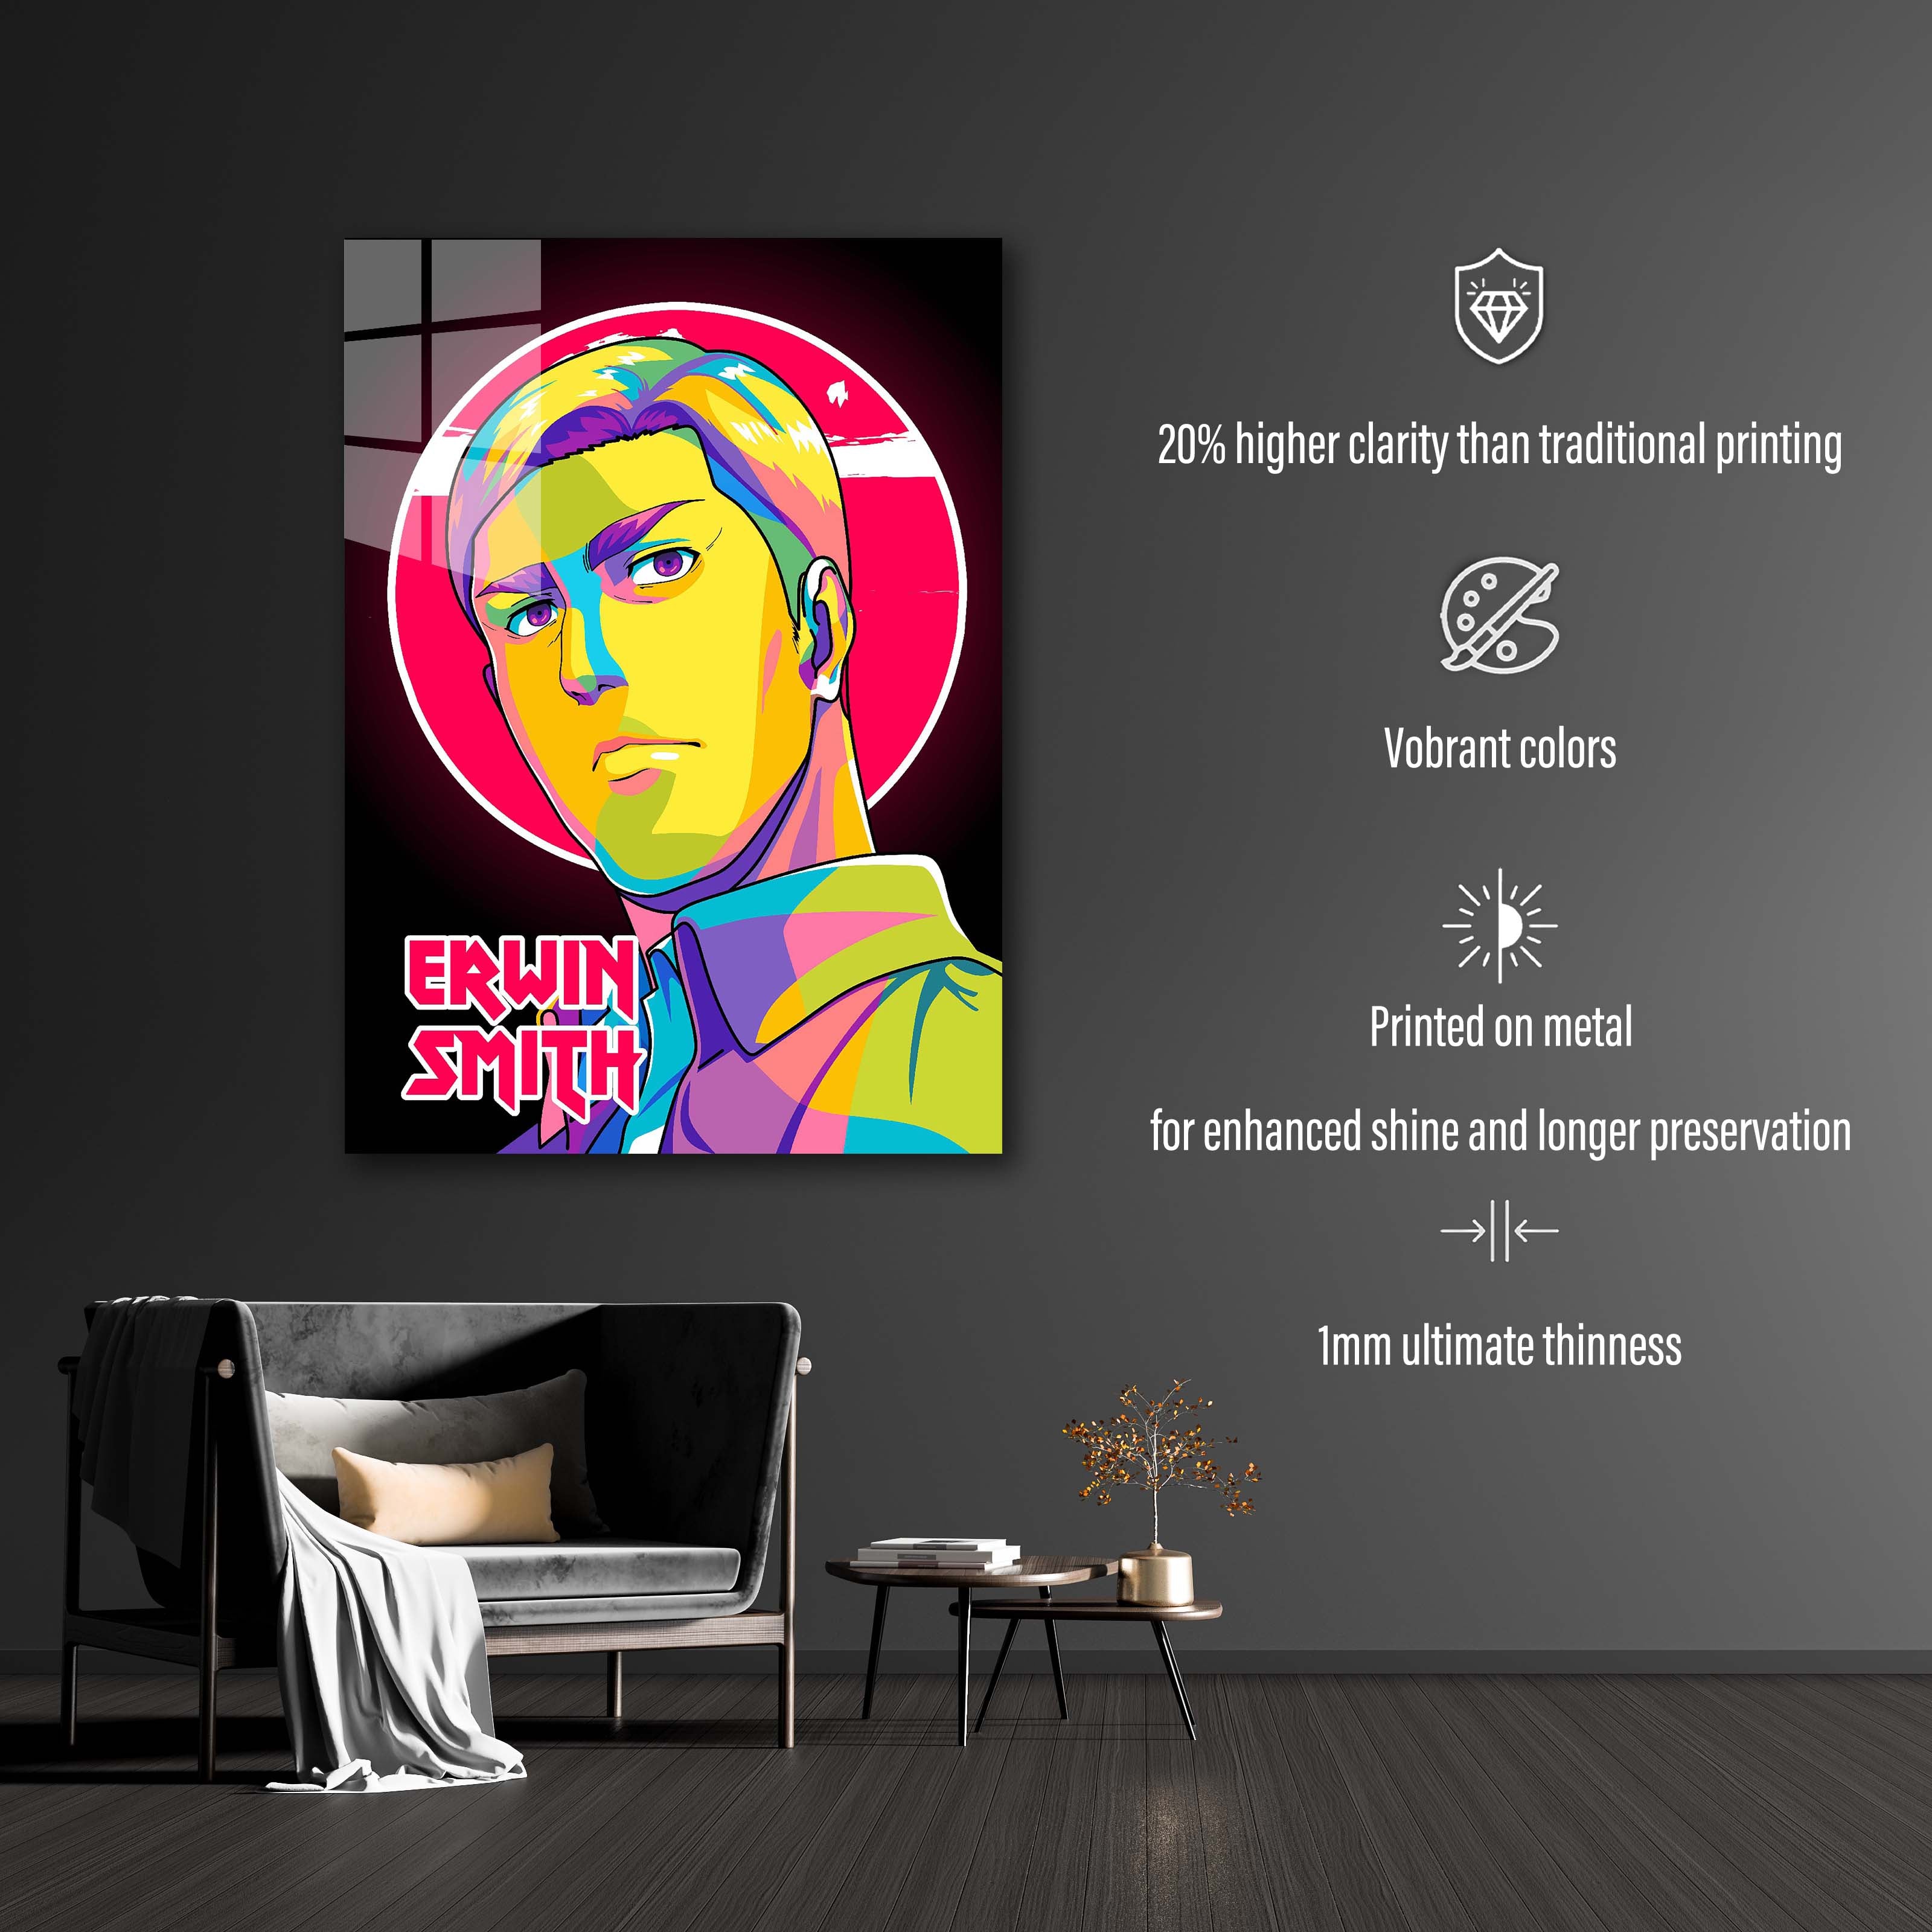 Erwin Smith in WPAP Style-designed by @V Styler